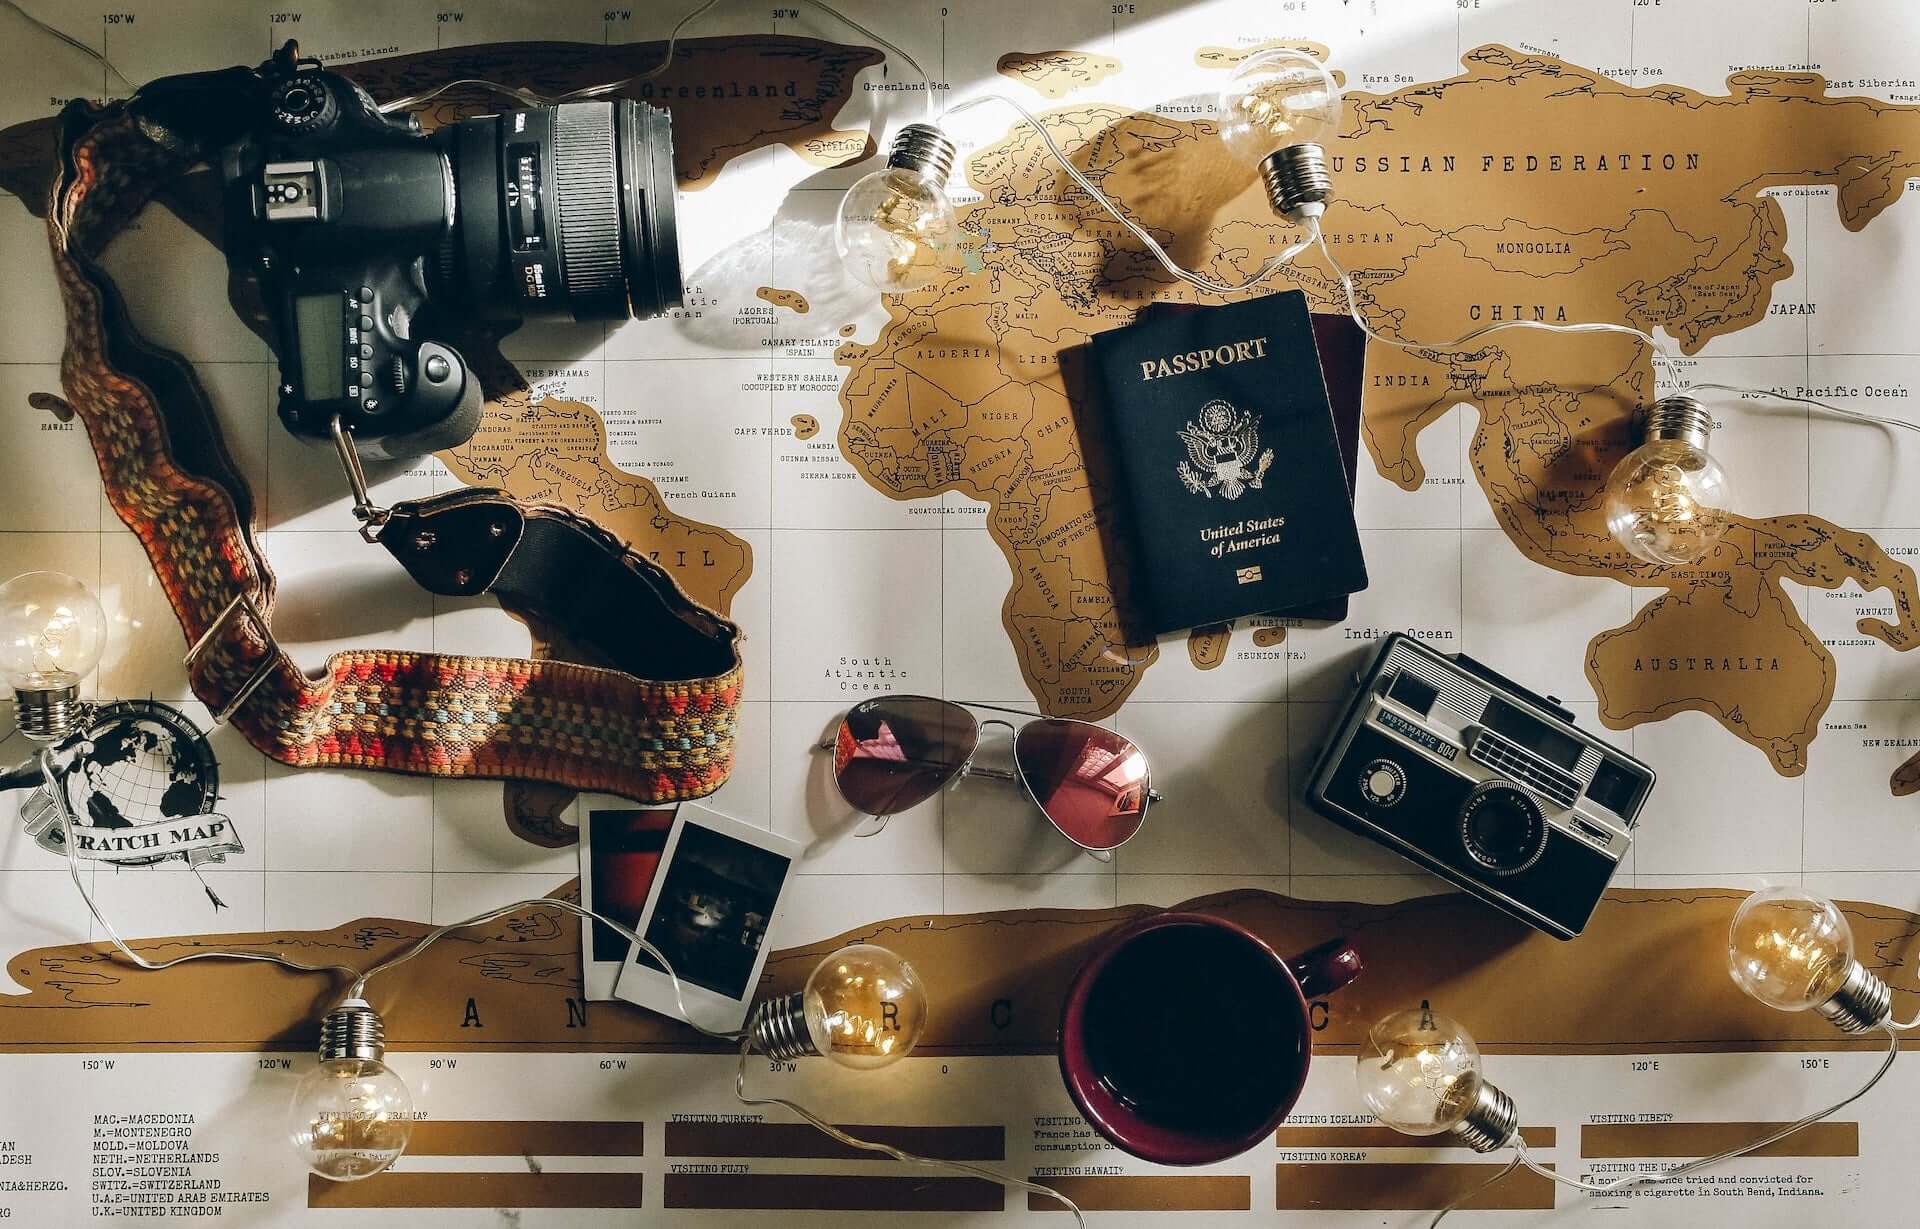 A scratch-off world map with cameras, a passport, and sunglasses resting on it.